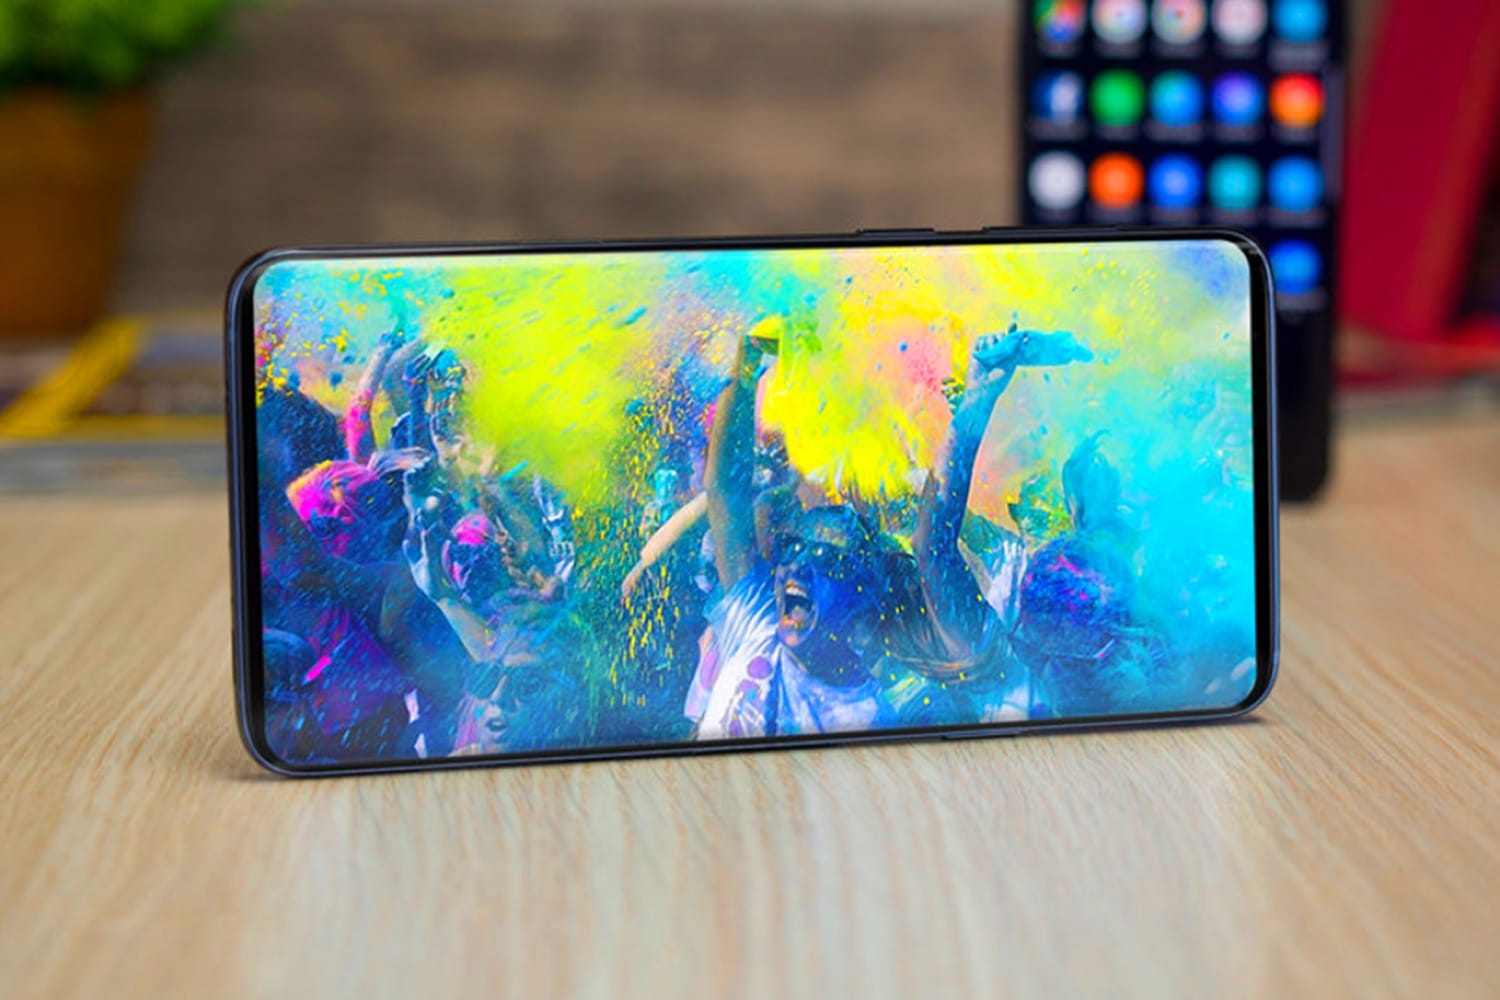 Samsung Galaxy s10 with new cutout infinity display